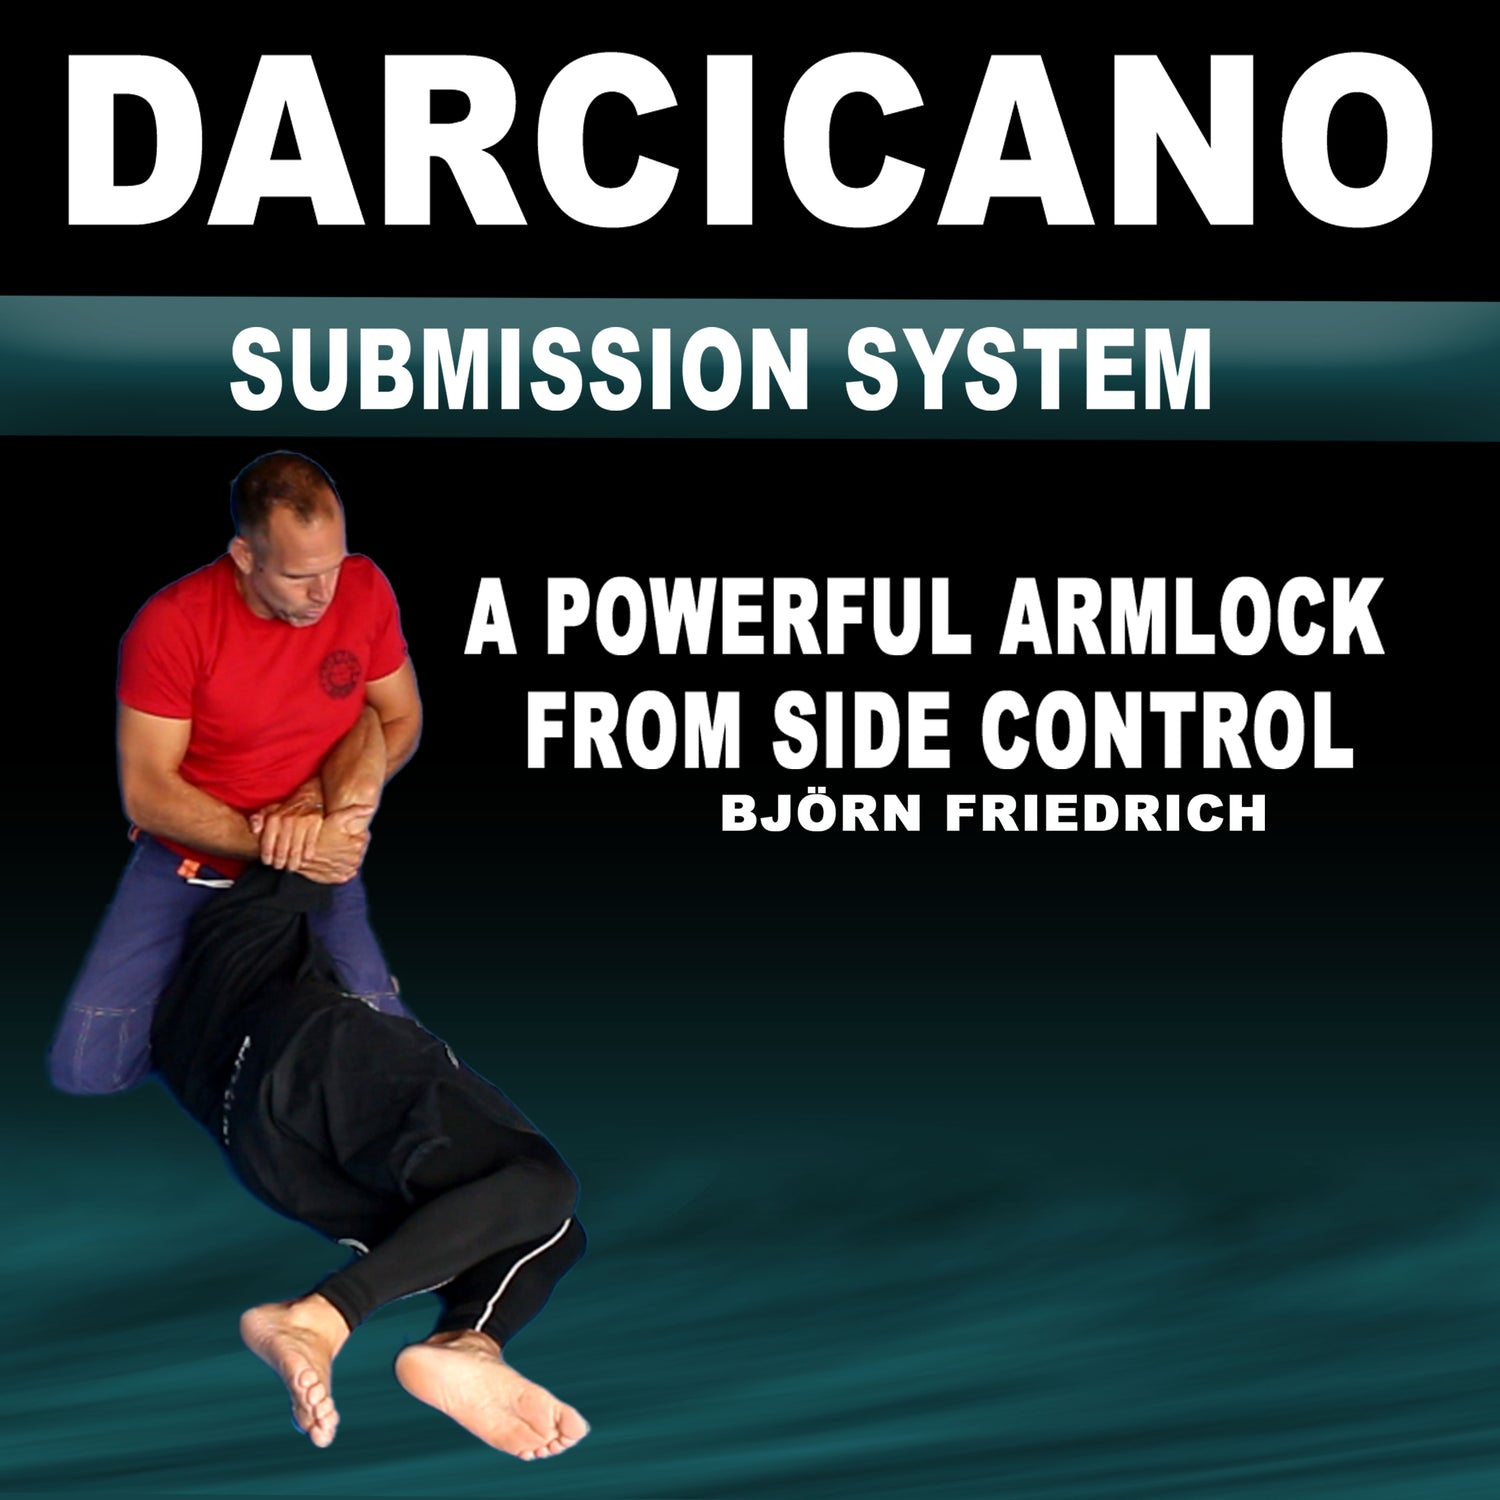 Darcicano Submission System by Bjorn Friedrich (On Demand)